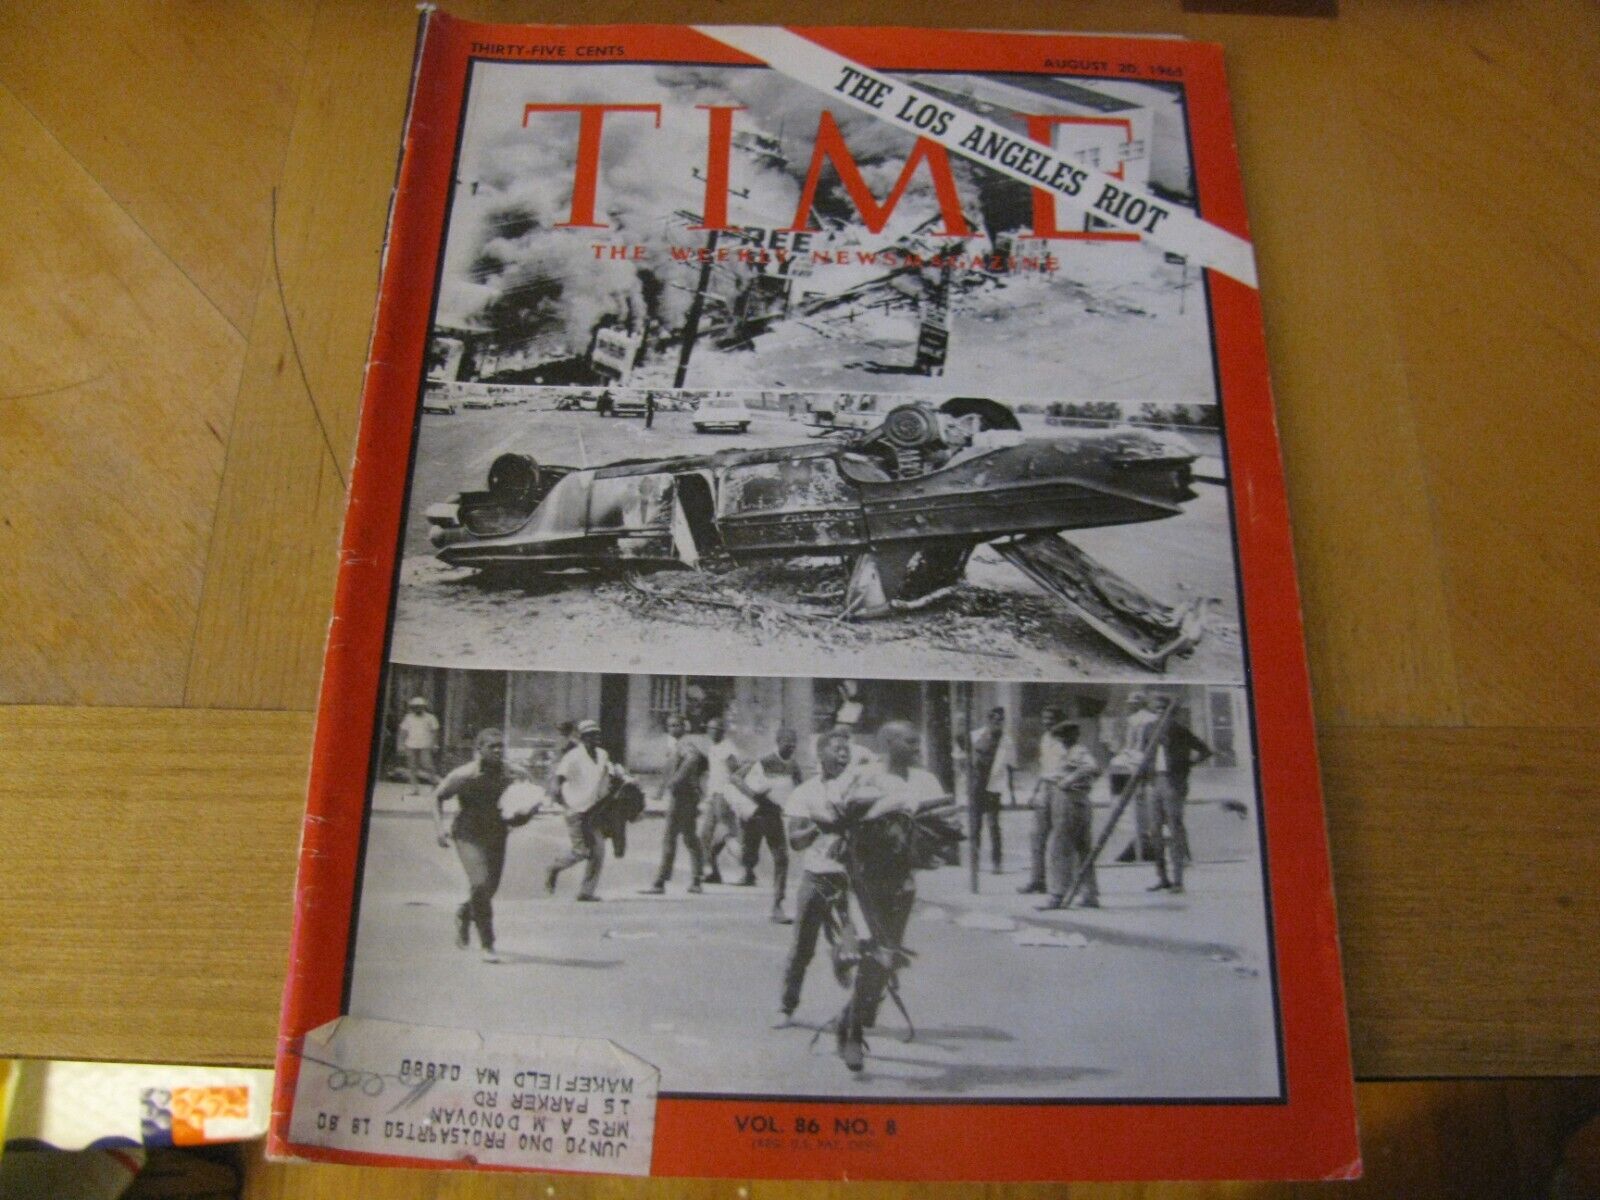 1965  TIME MAGAZINE  AUGUST 20   THE LOS ANGELES LA  RIOT   LOWEST PRICE ON EBAY